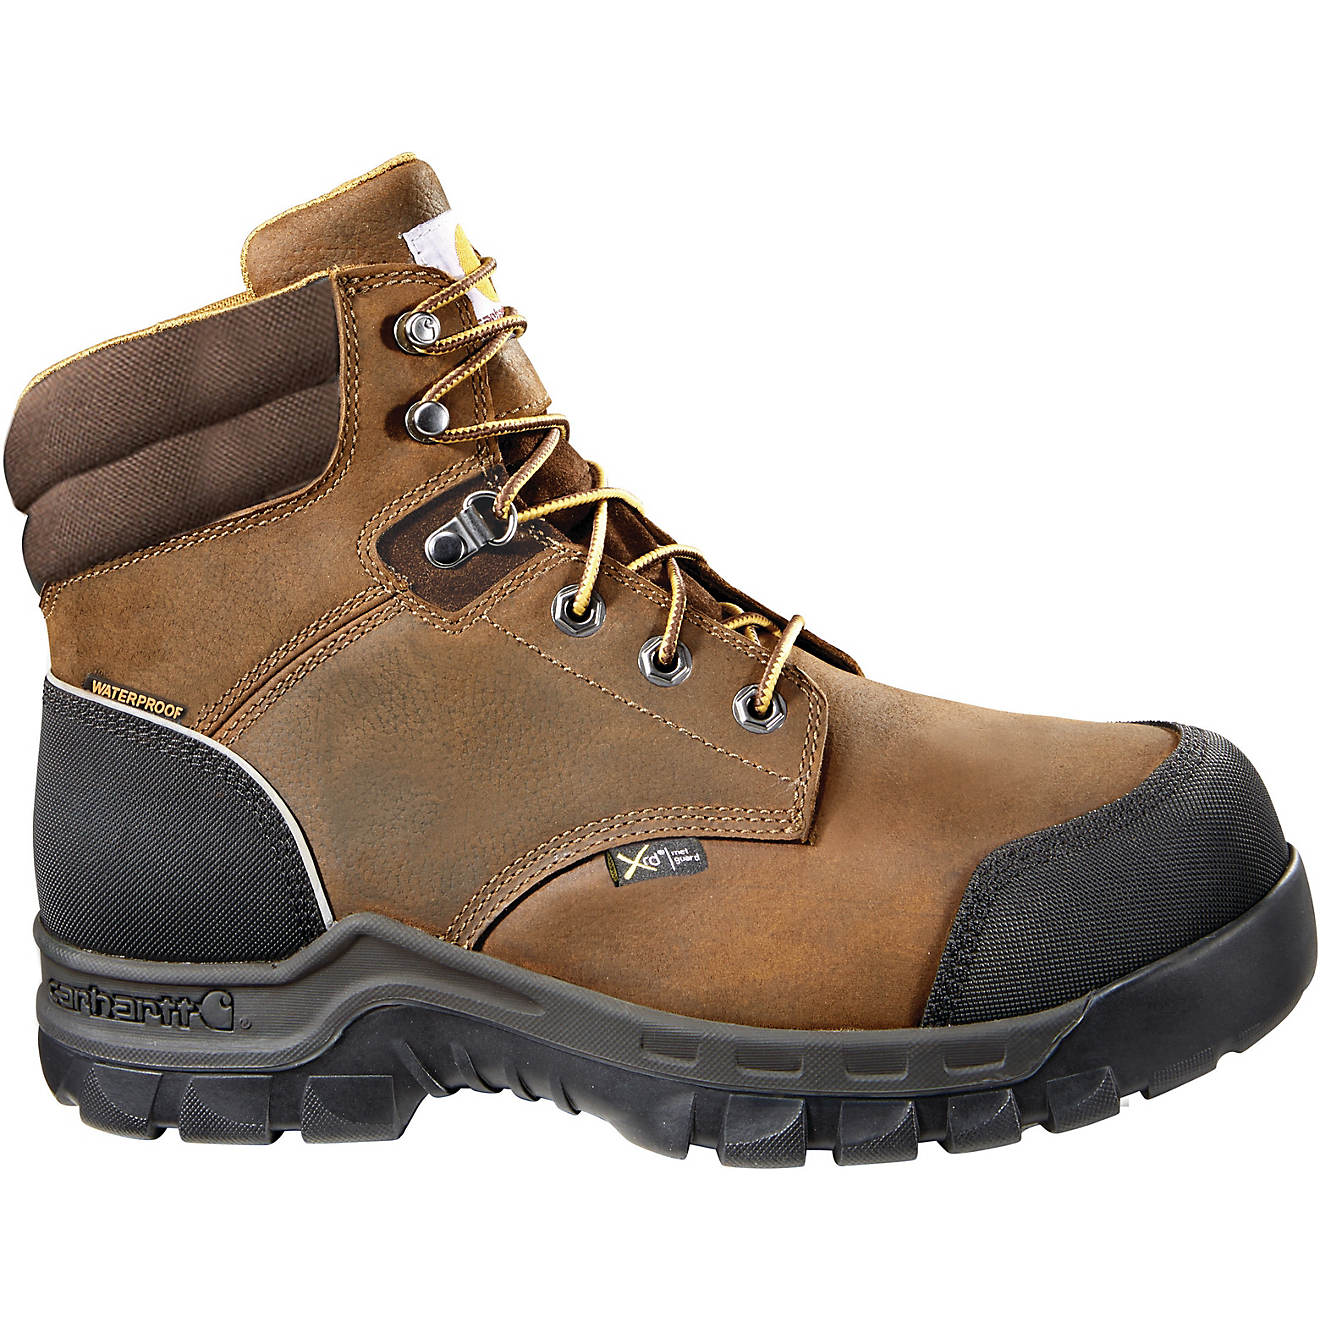 Carhartt Men's Rugged Flex Met Guard Composite Toe Lace Up Work Boots                                                            - view number 1